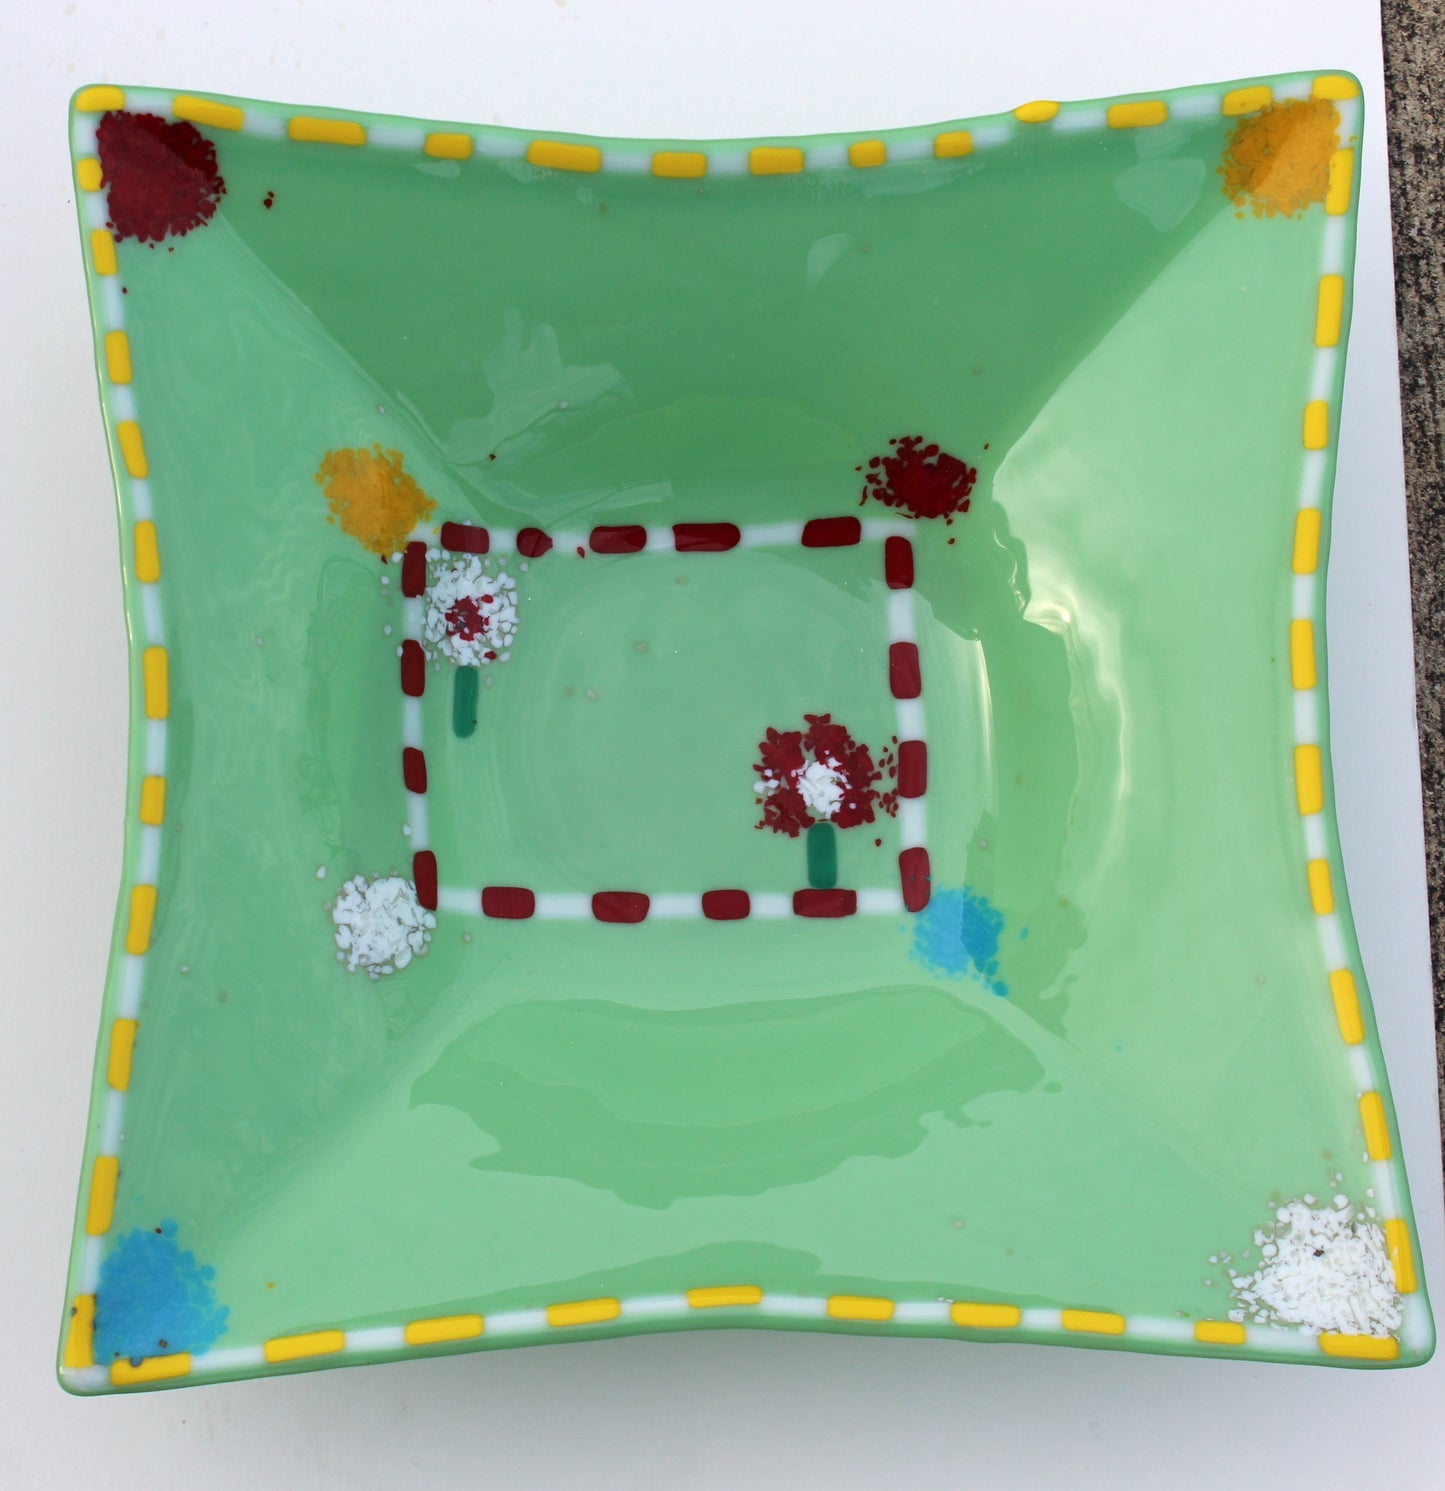 This is green fused glass with a yellow and white border, with splatters of color in each corner. COlors include yellow, burgundy, blue and white